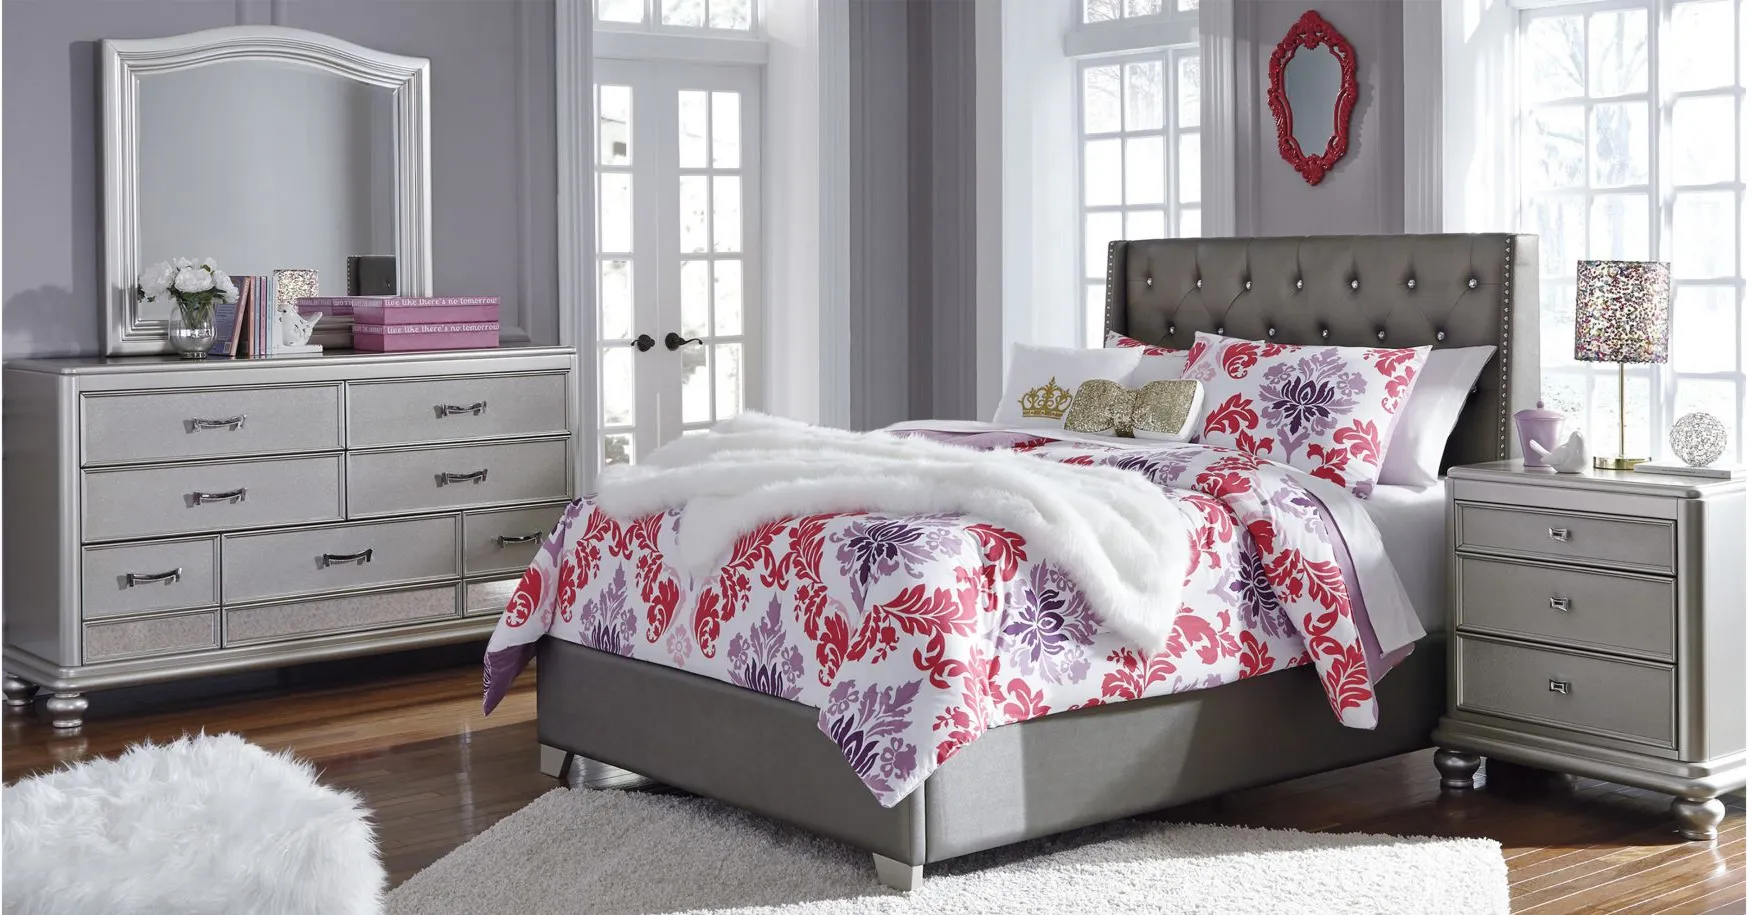 Coralayne Upholstered 4-pc. Bedroom Set in Gray by Ashley Furniture